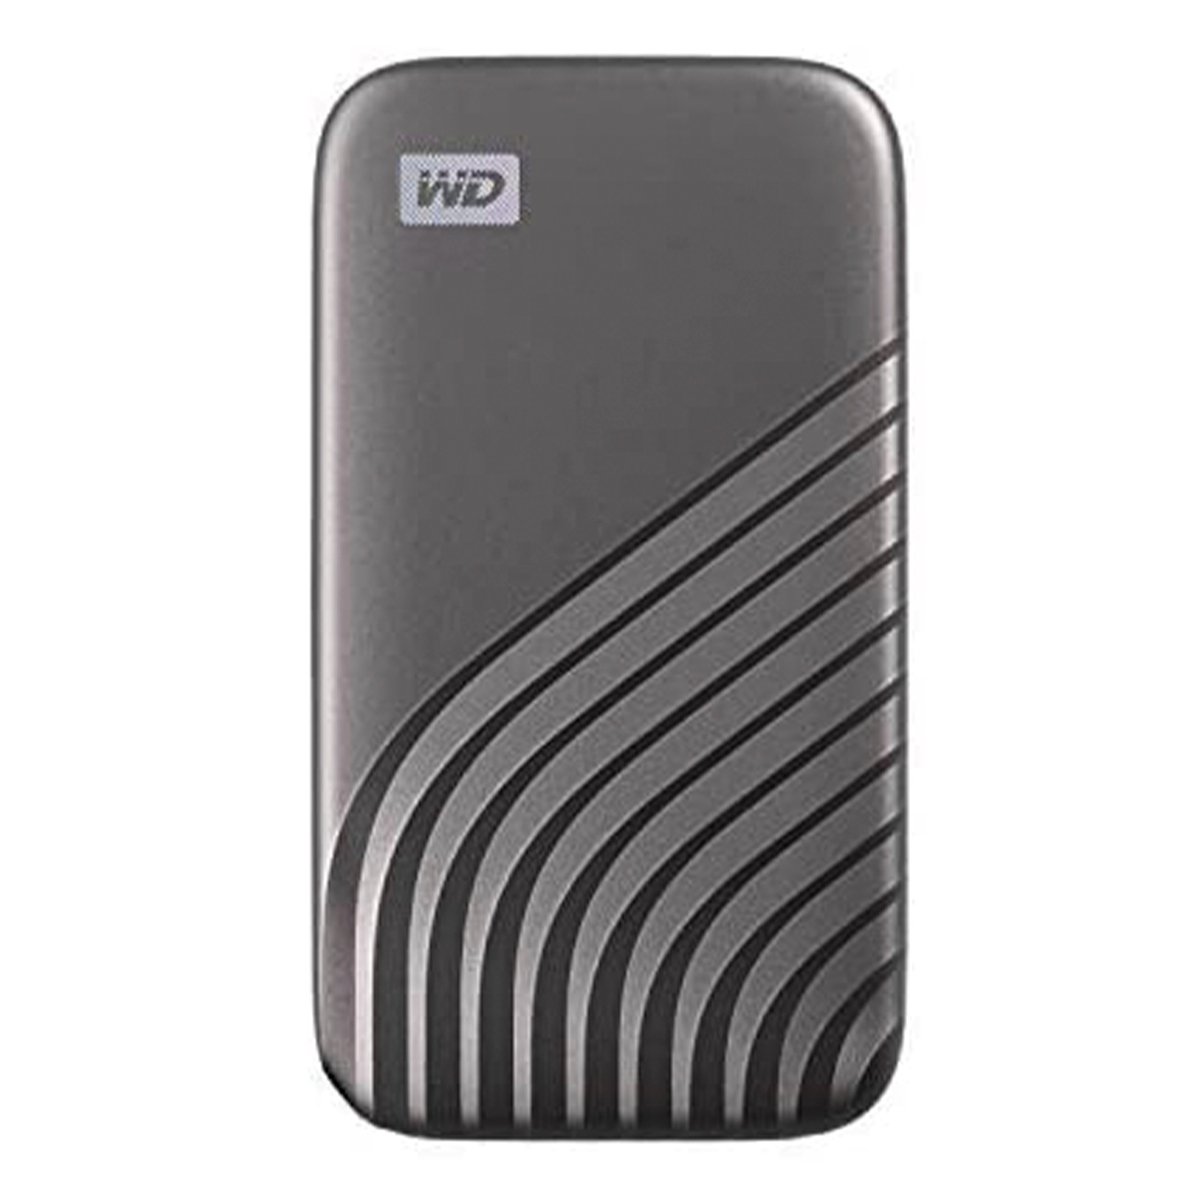 My Passport™ SSD 2TB Space Gray, 1050MB/s Read, 1000MB/s Write, PC & Mac Compatiable